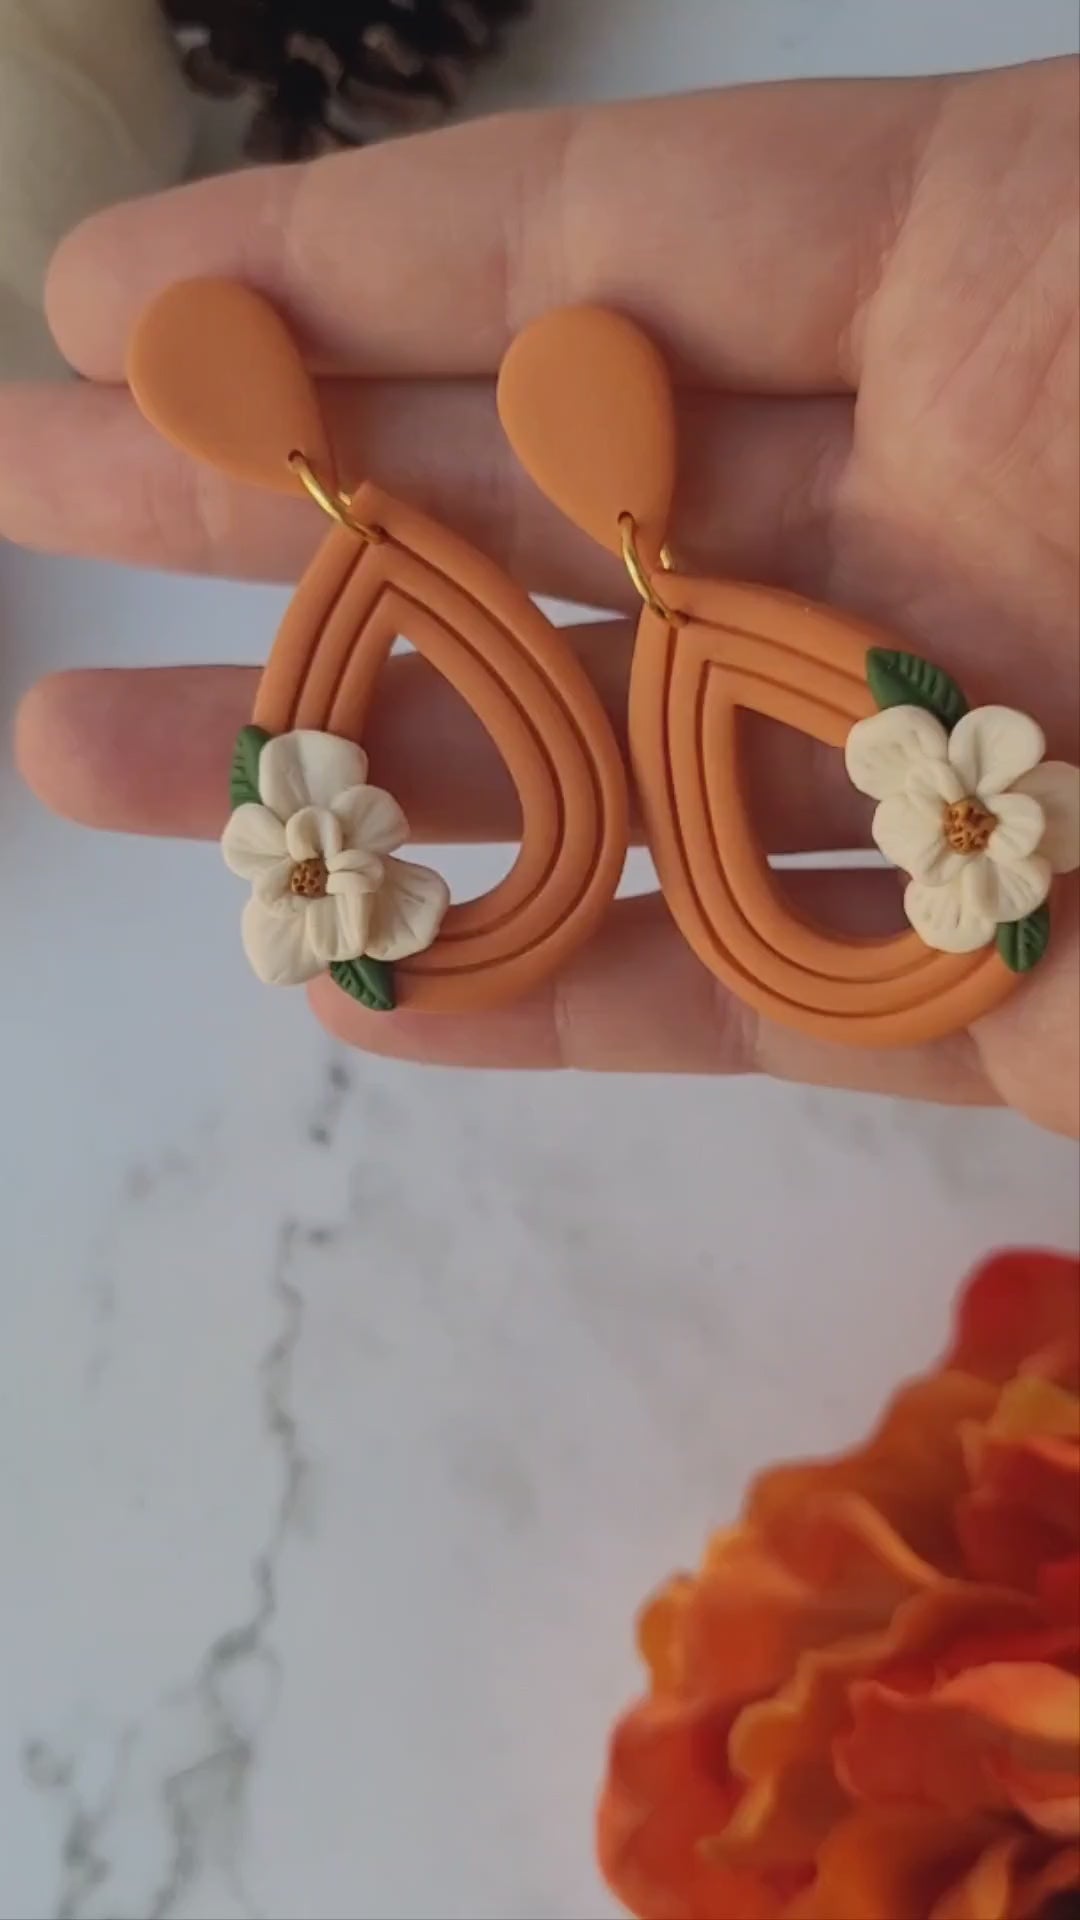 video close up of orange teardrop earrings with a white magnolia flower sitting on a marble background.